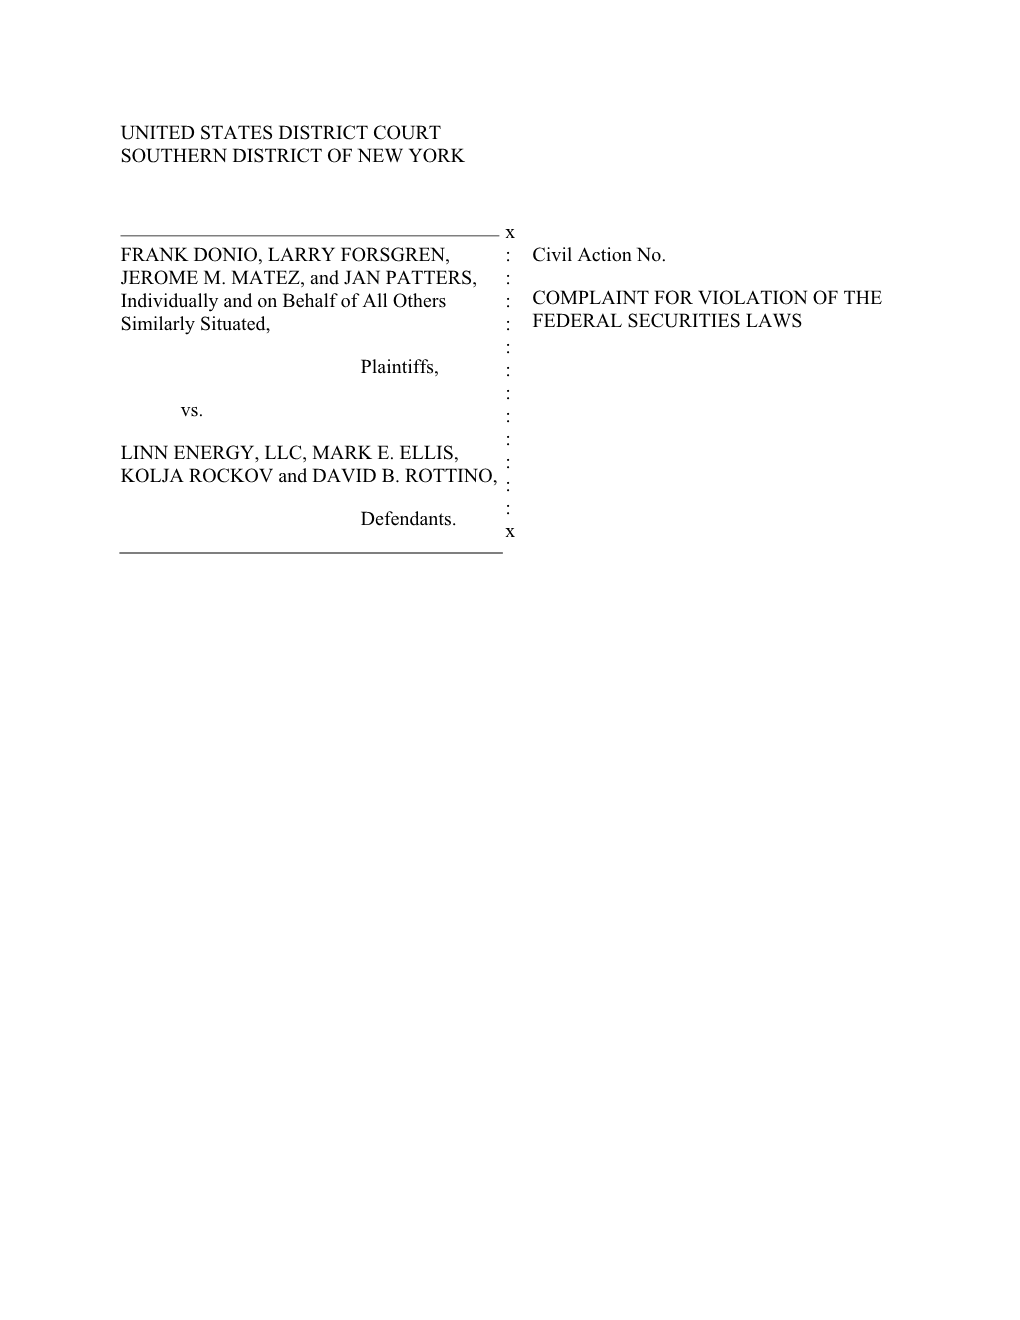 UNITED STATES DISTRICT COURT SOUTHERN DISTRICT of NEW YORK X FRANK DONIO, LARRY FORSGREN, JEROME M. MATEZ, and JAN PATTERS